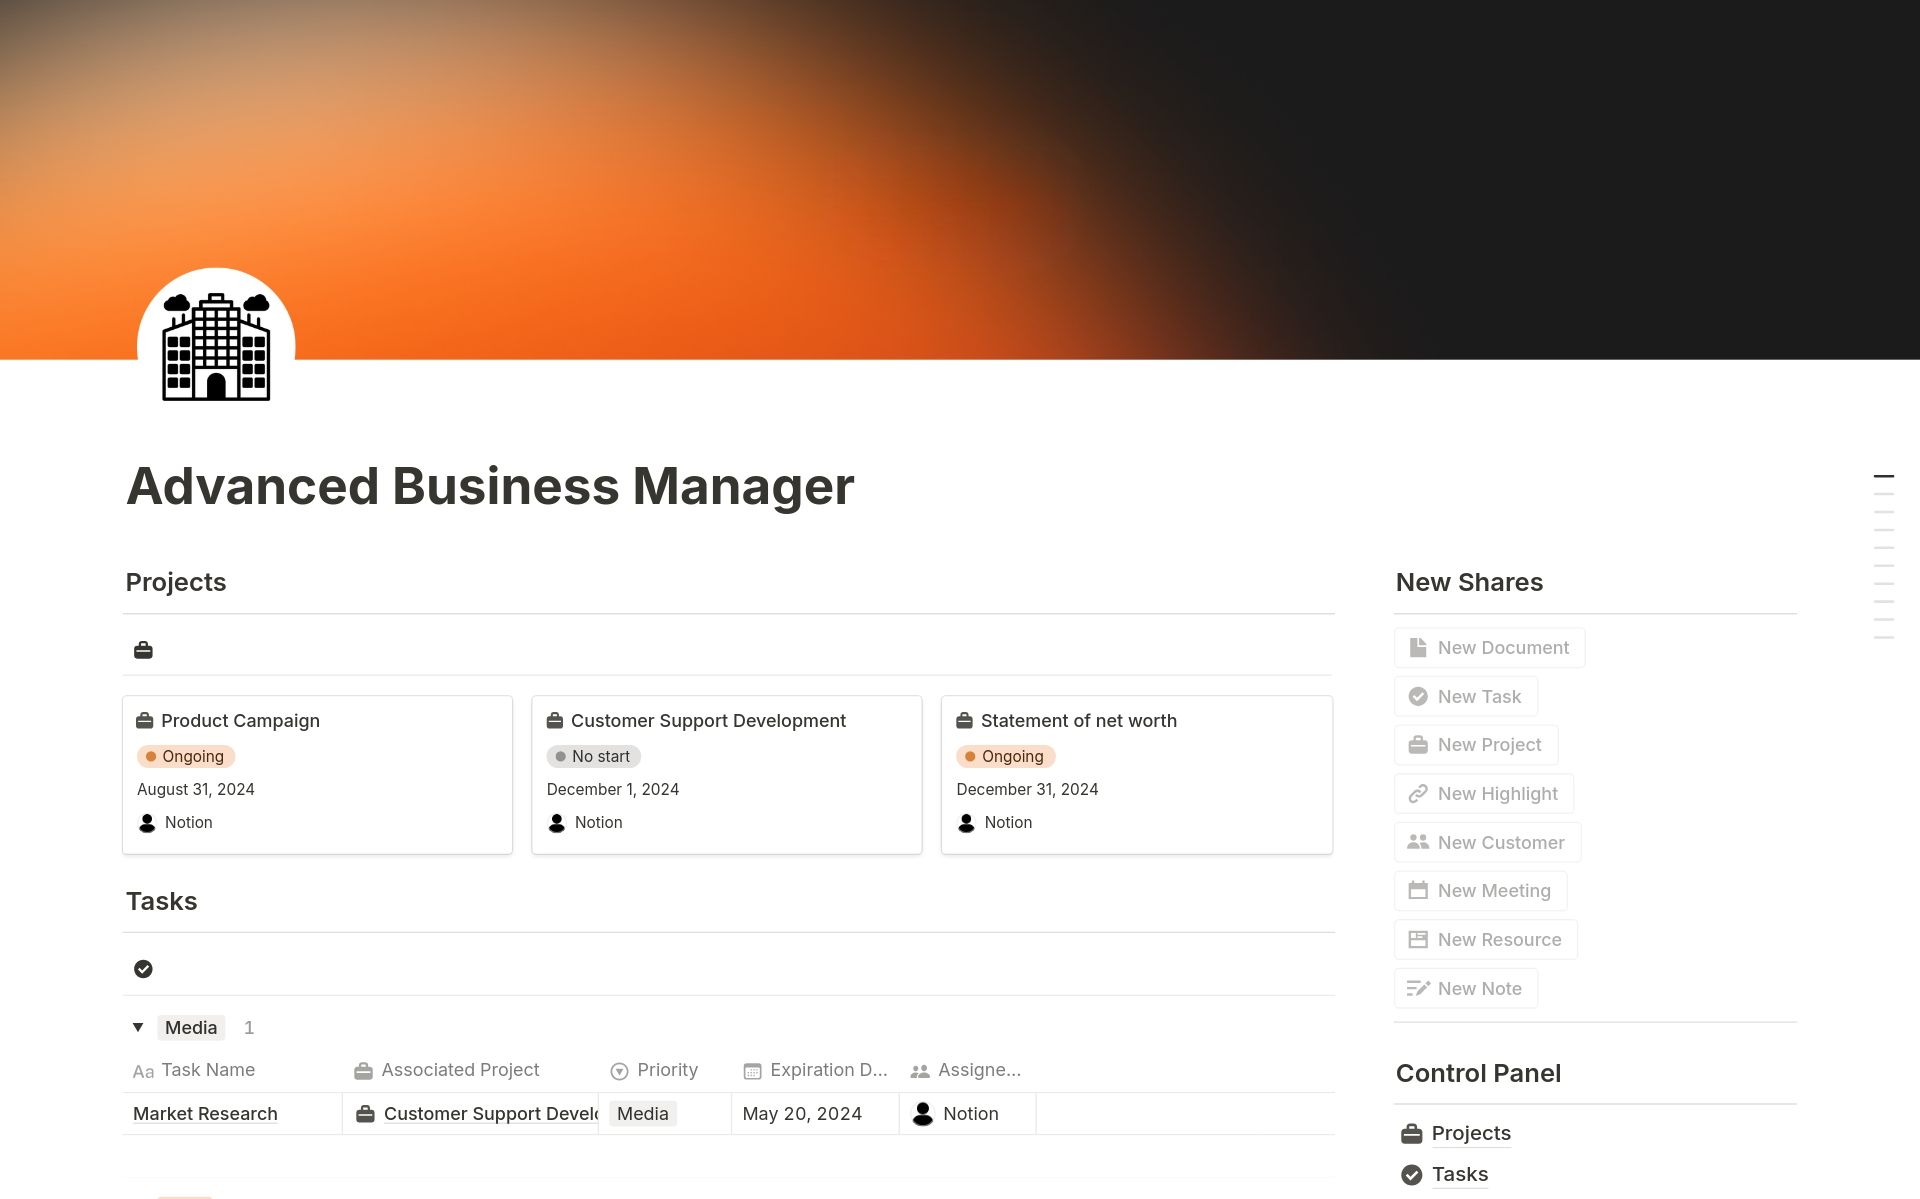 Optimize all aspects of your business with our Advanced Business Manager template in Notion. Ideal for large and growing companies.